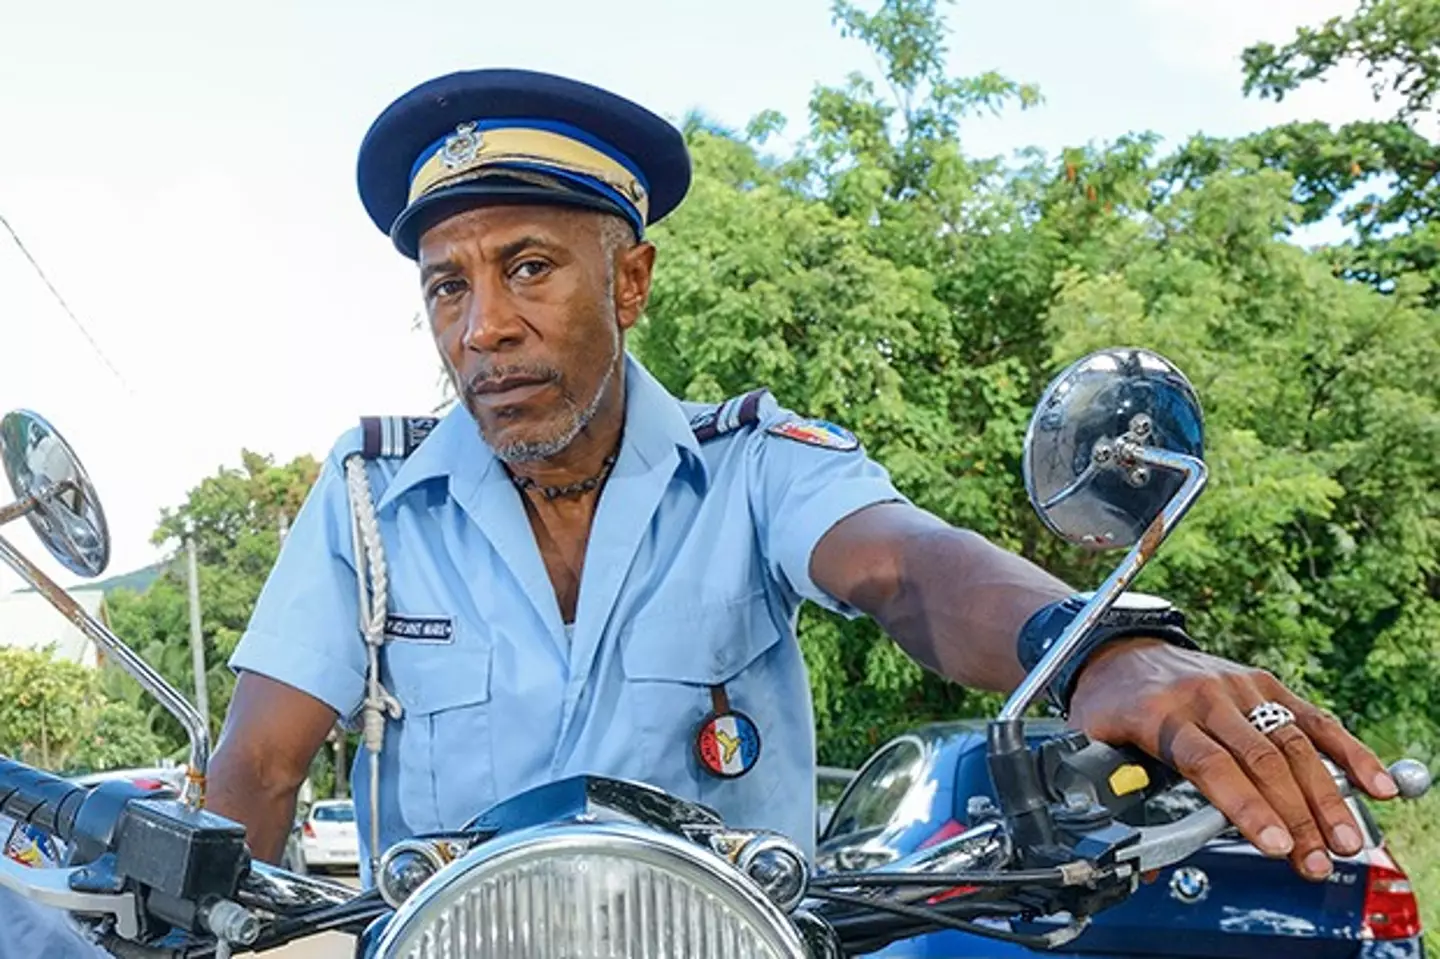 Danny John-Jules will reprise his role as Officer Dwayne Myers (